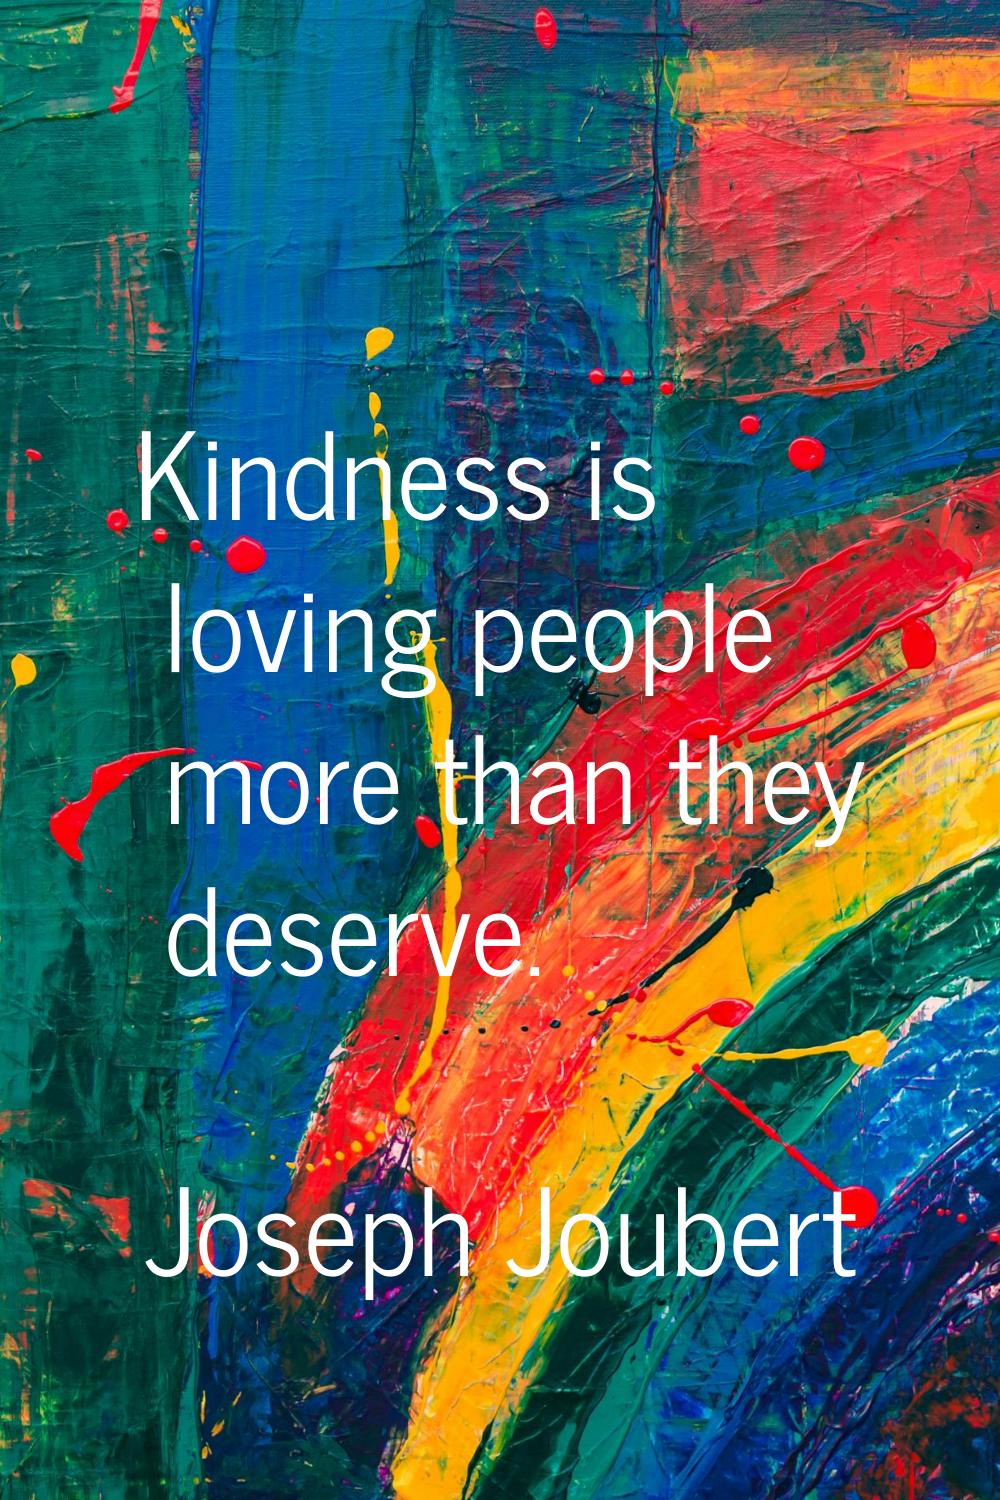 Kindness is loving people more than they deserve.